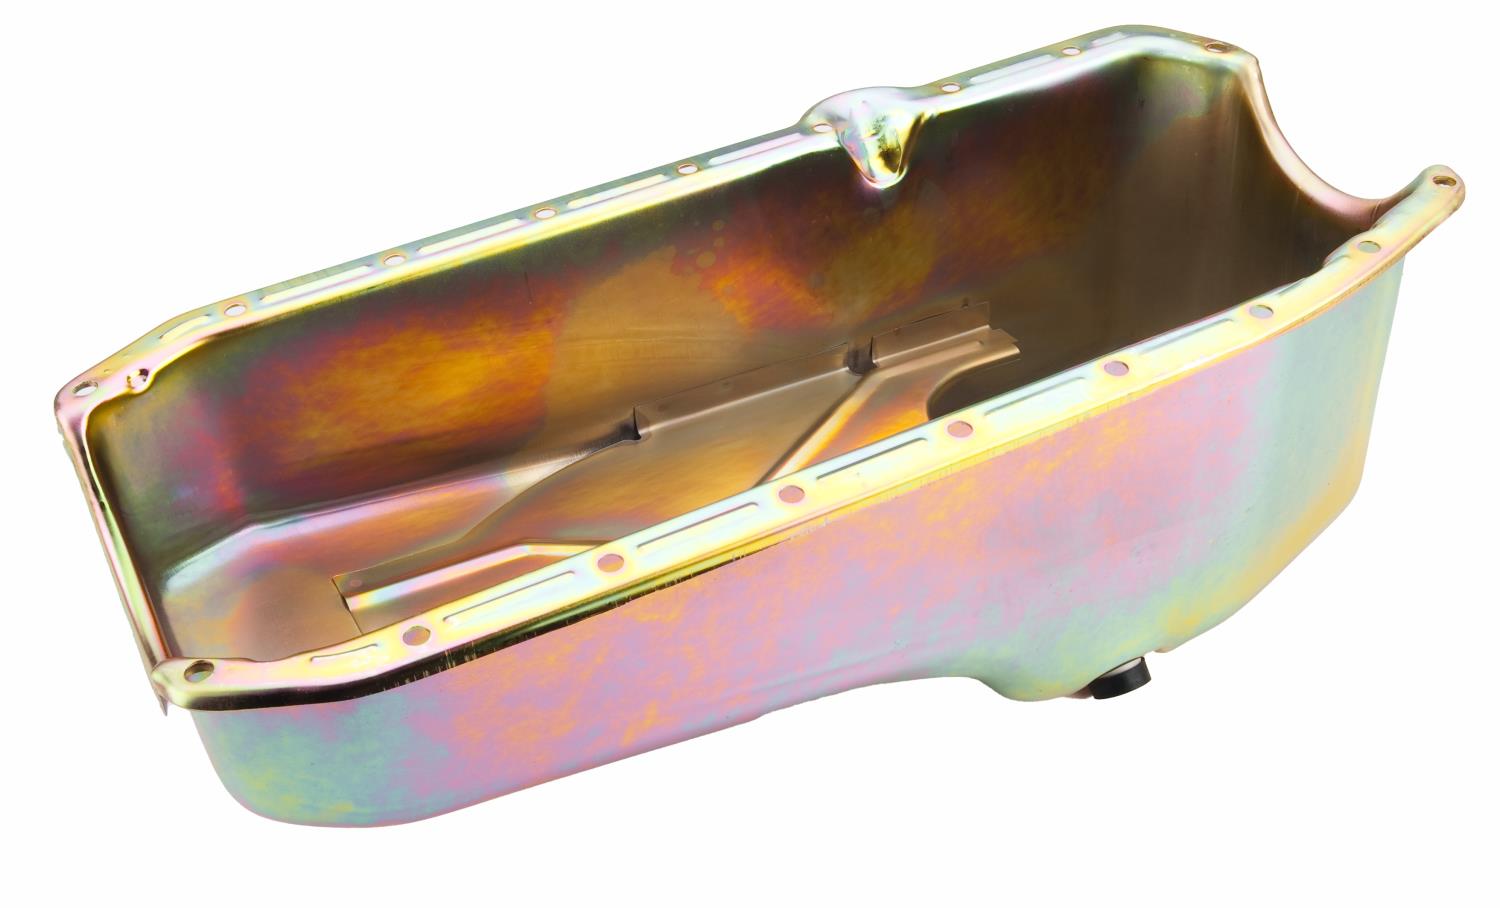 Stock-Style Replacement Oil Pan for 1980-1985 Small Block Chevy w/Right Hand Dip Stick [Gold Zinc]